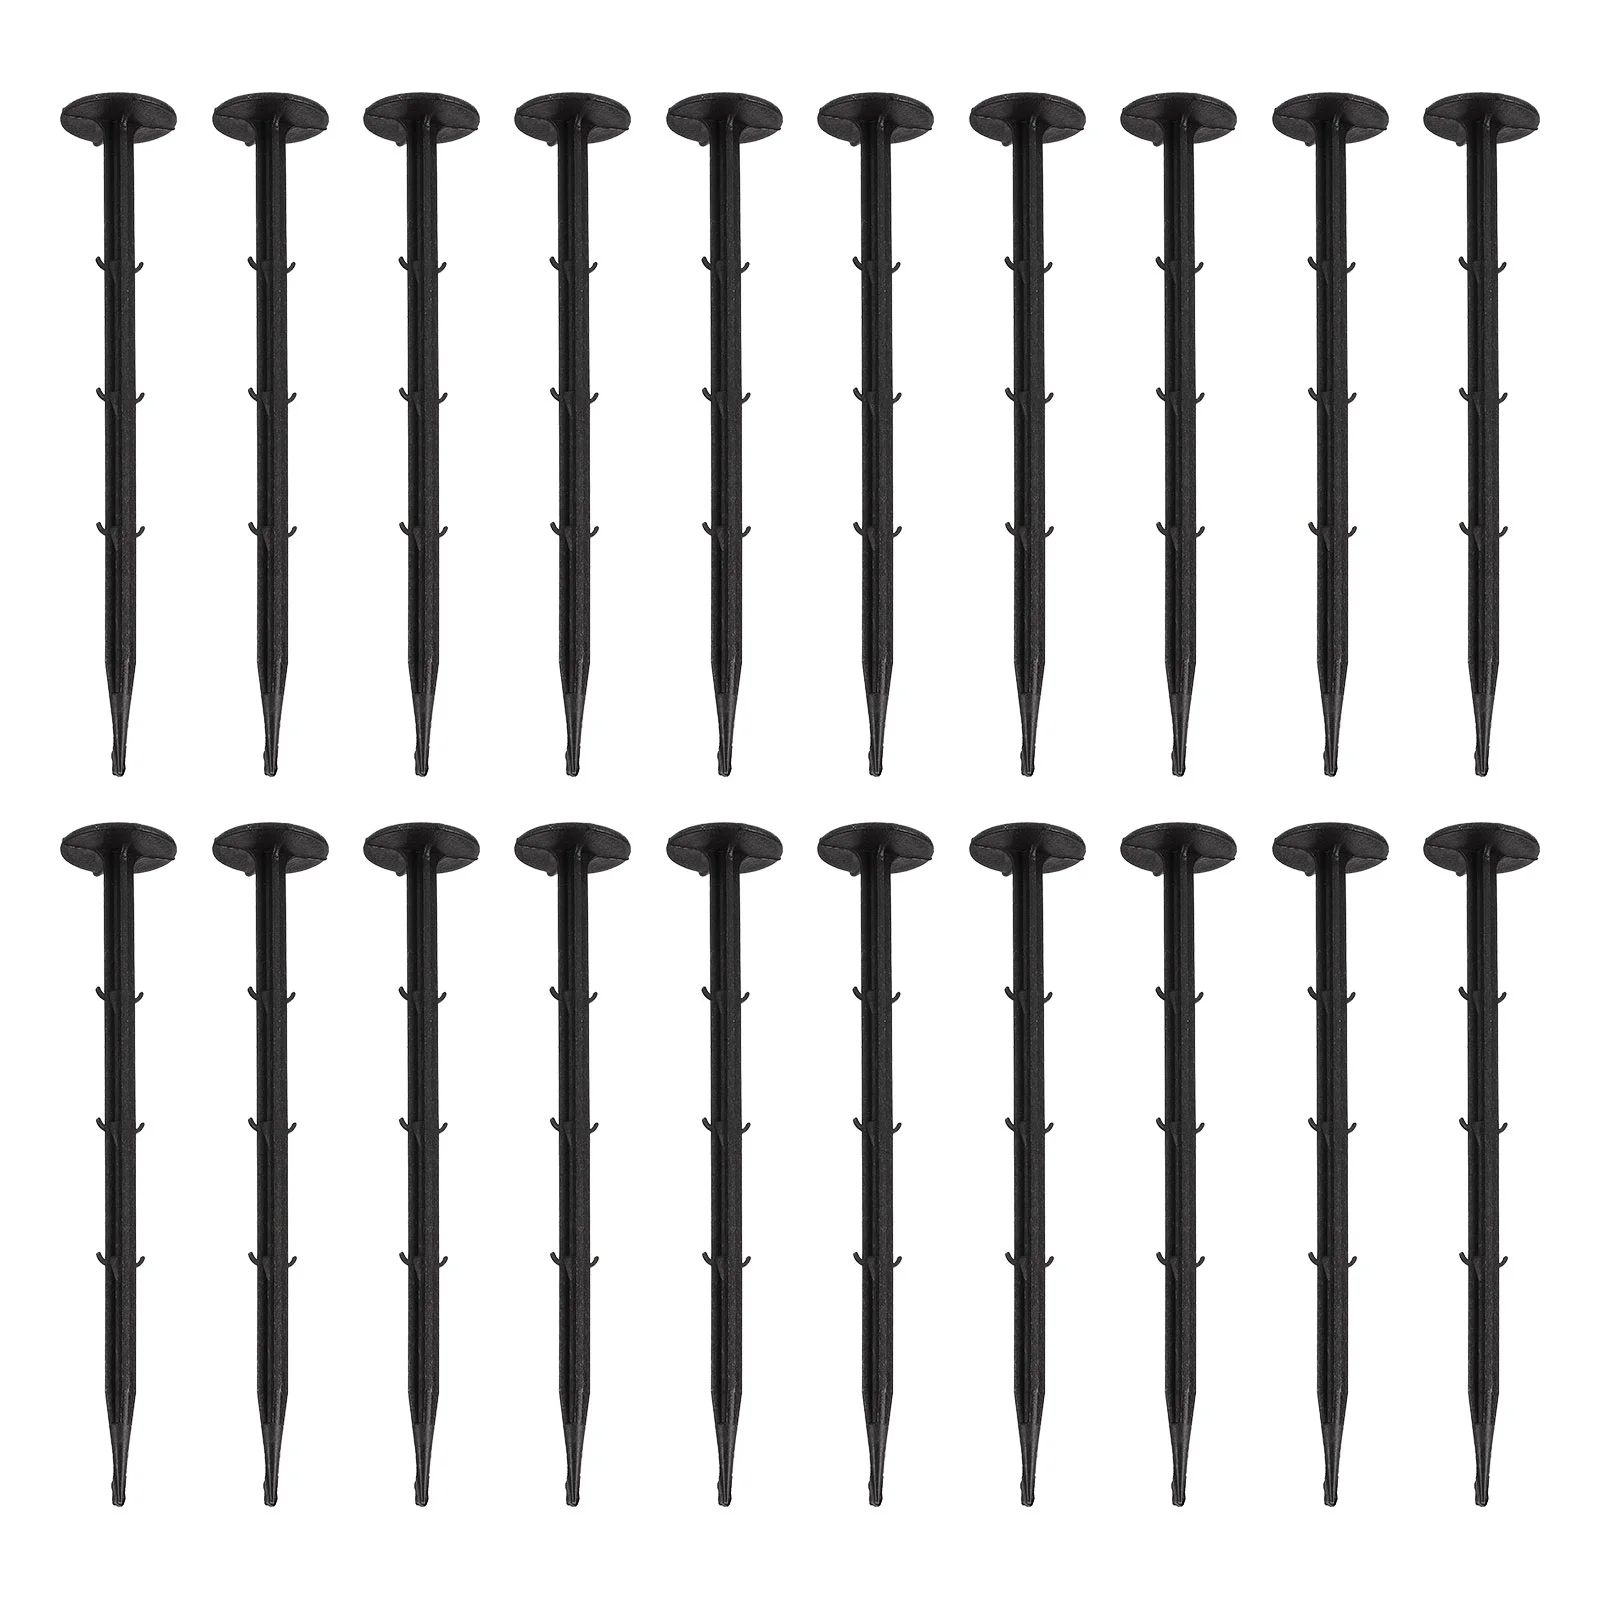 

100 Pcs Camping Tents Plastic Nails Ground Stake Gardening Outdoor Pile Fixing Stakes Pegs